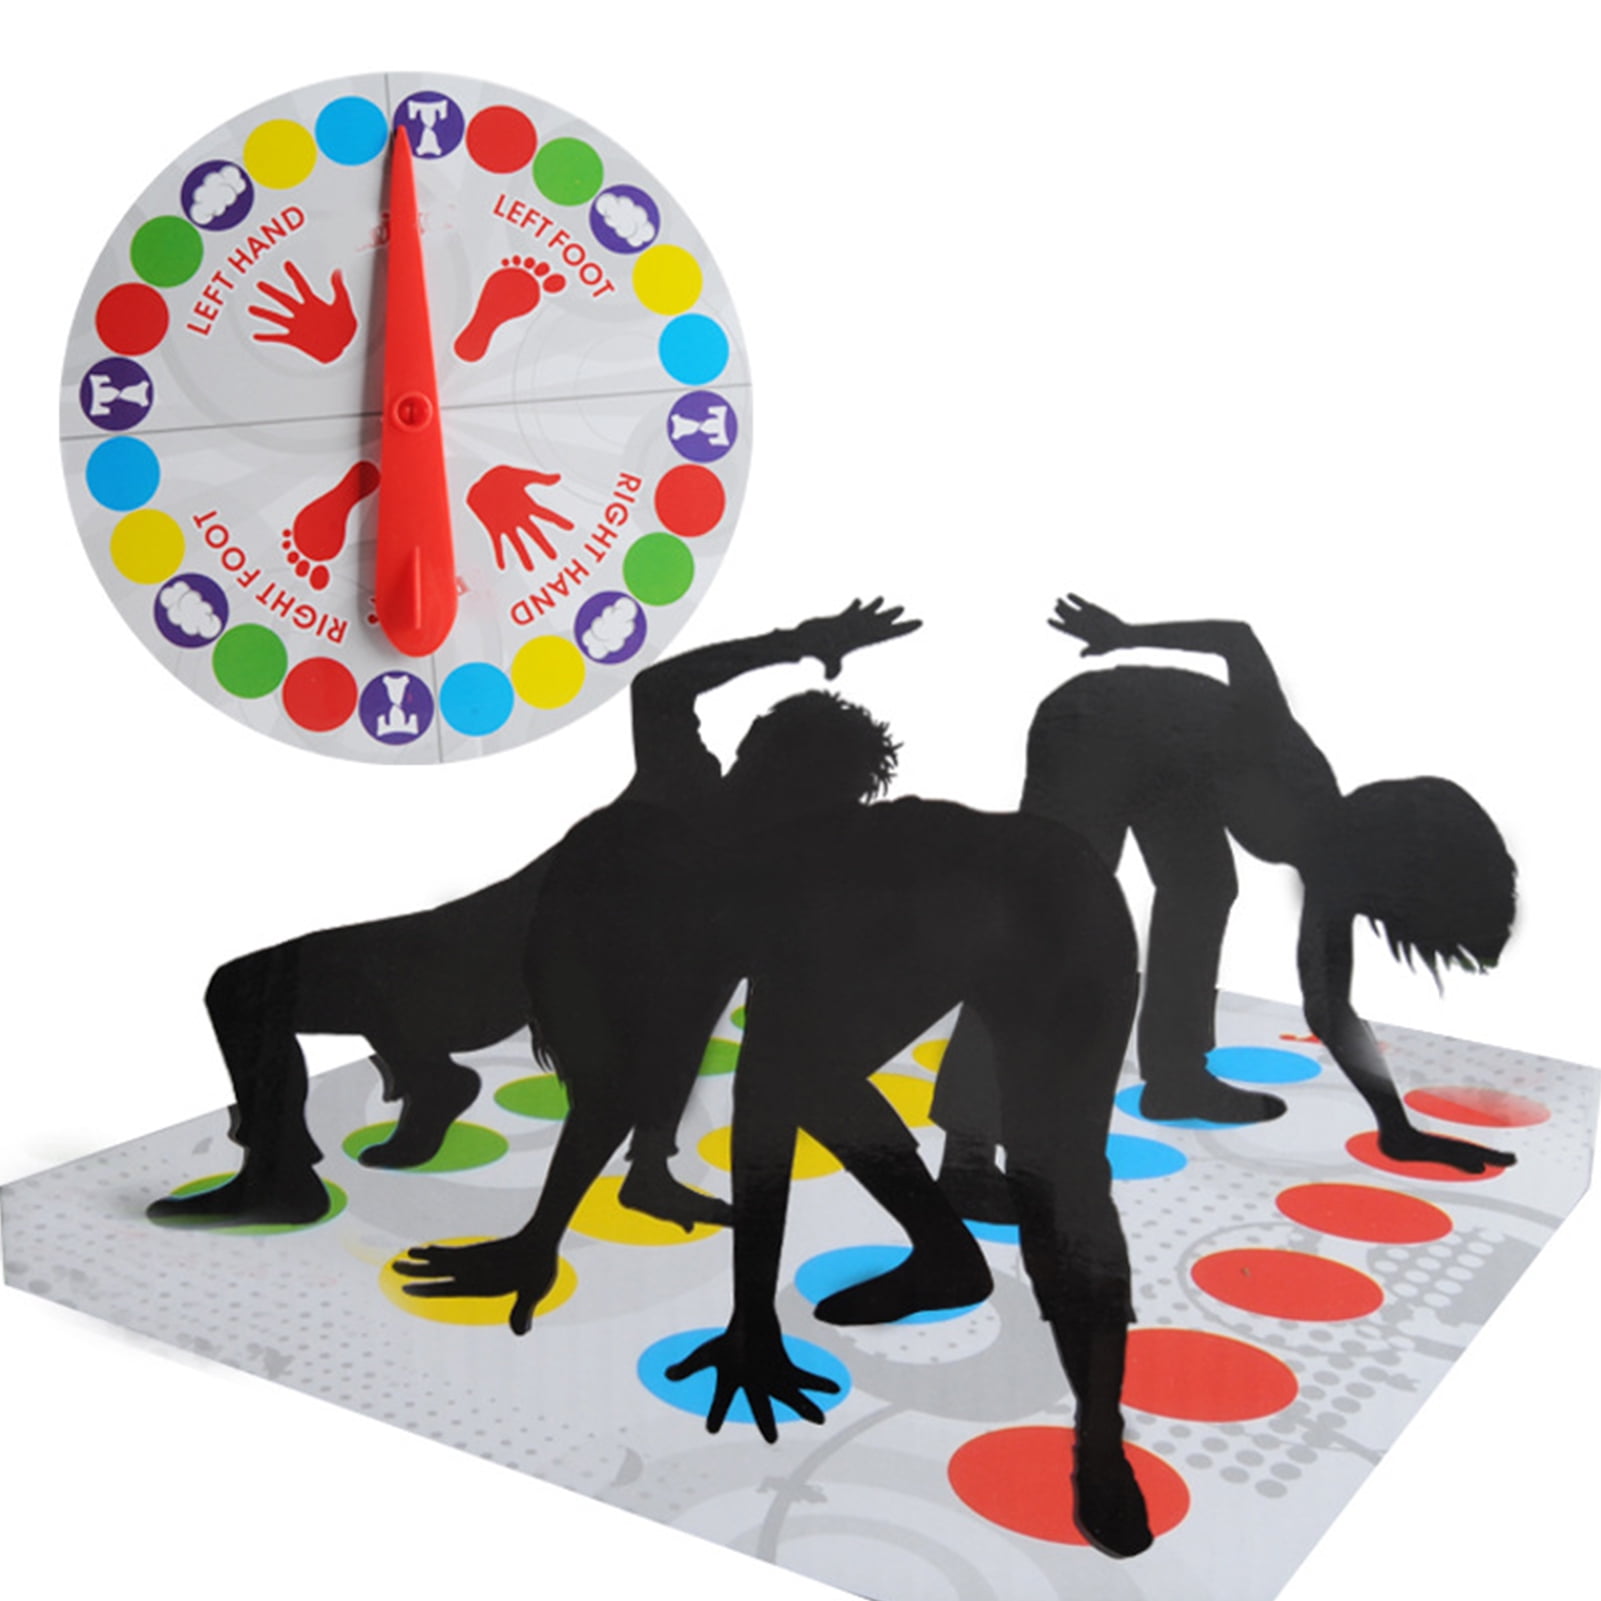 Twister - Outdoor Games - Family Games